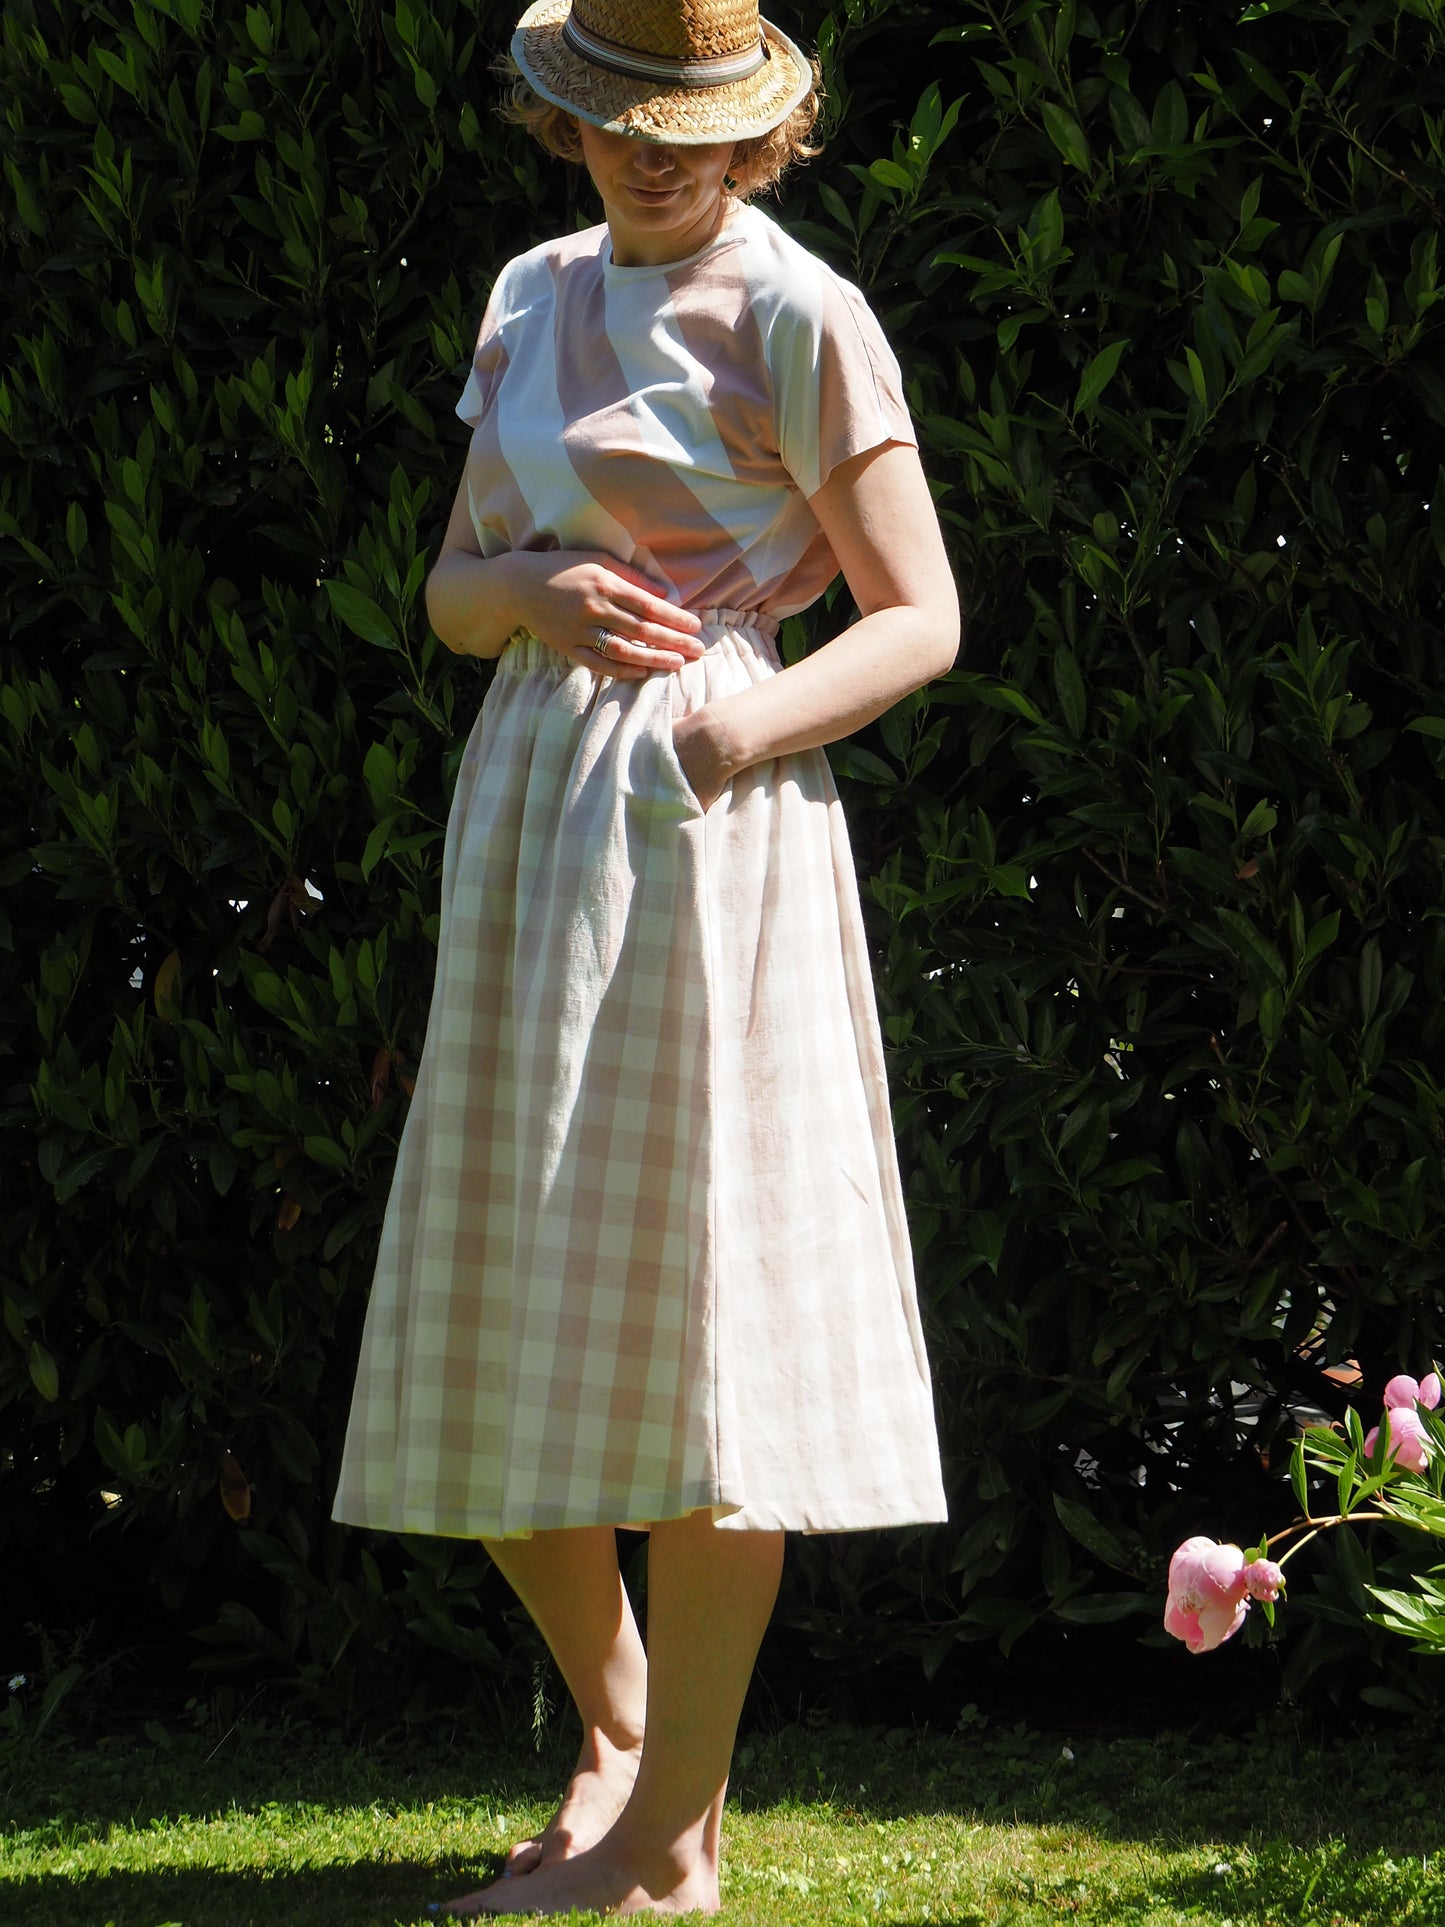 Ava Skirt Ladies 34 - 52 and Kides 74/80 - 158/164 sewing pattern and instructions